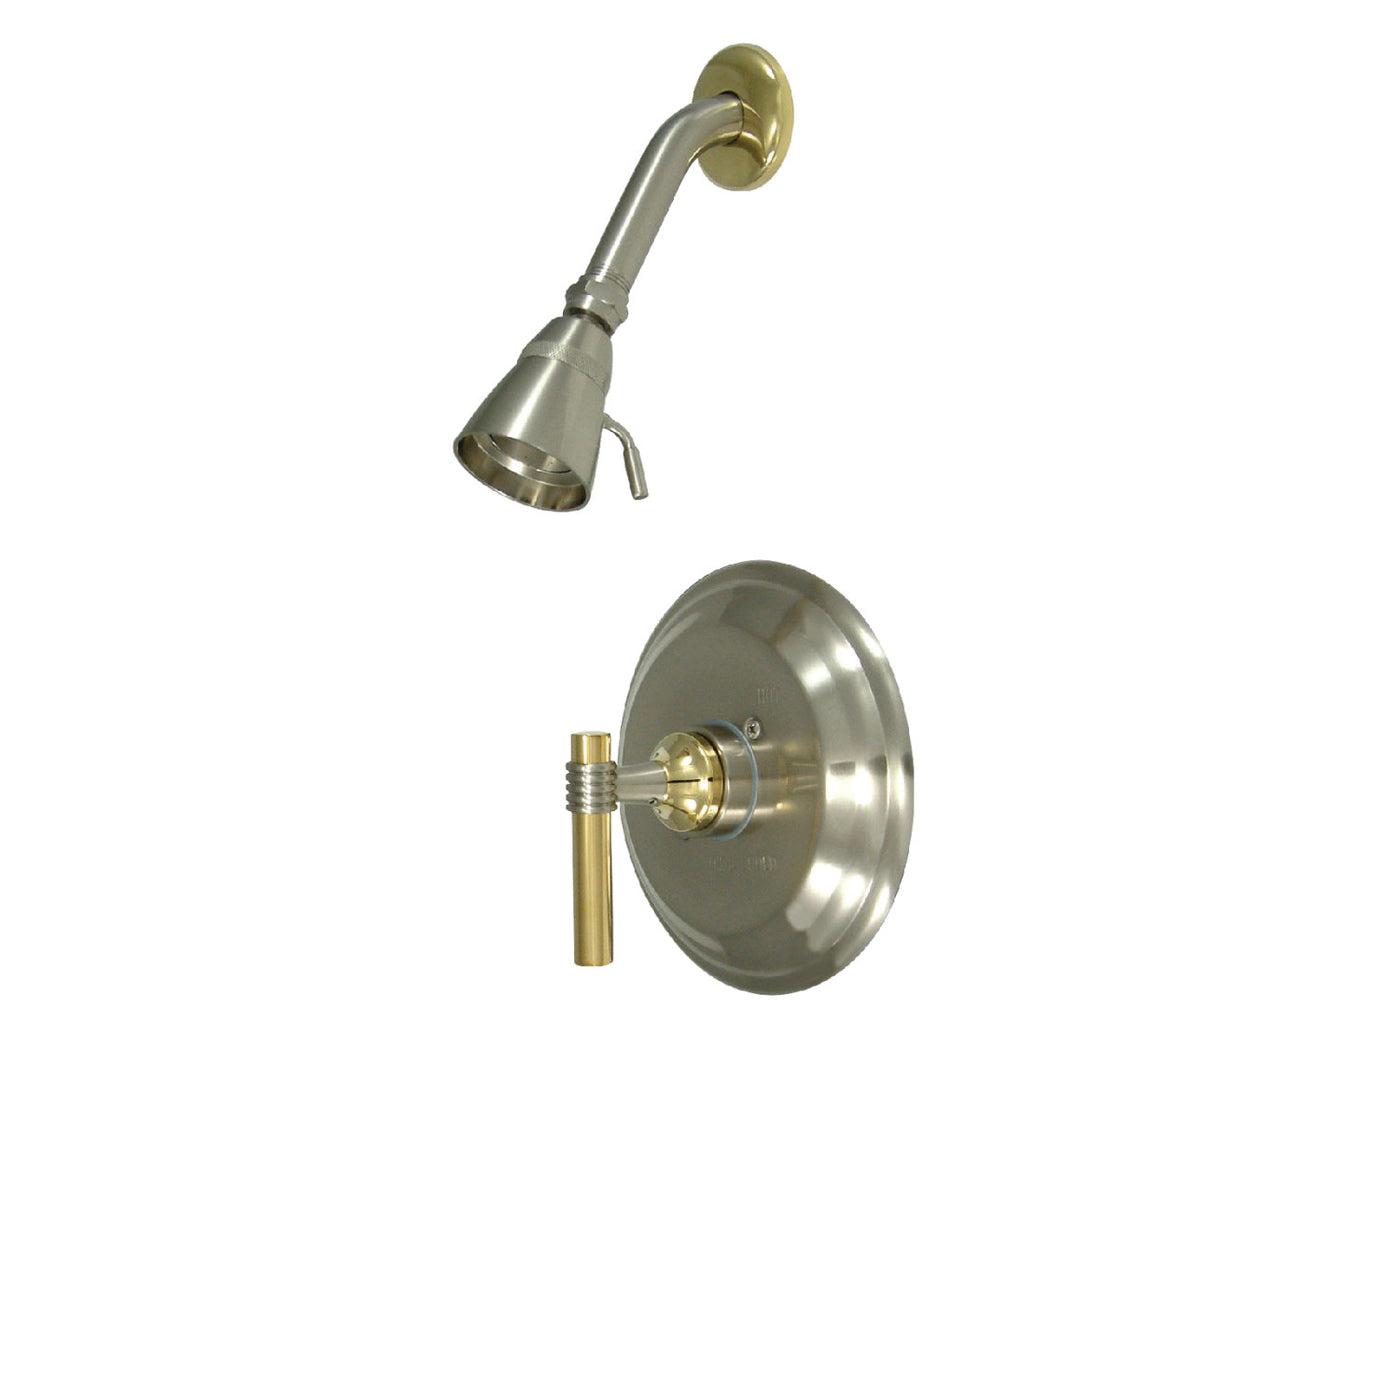 Elements of Design EB2639MLSO Shower Faucet, Brushed Nickel/Polished Brass